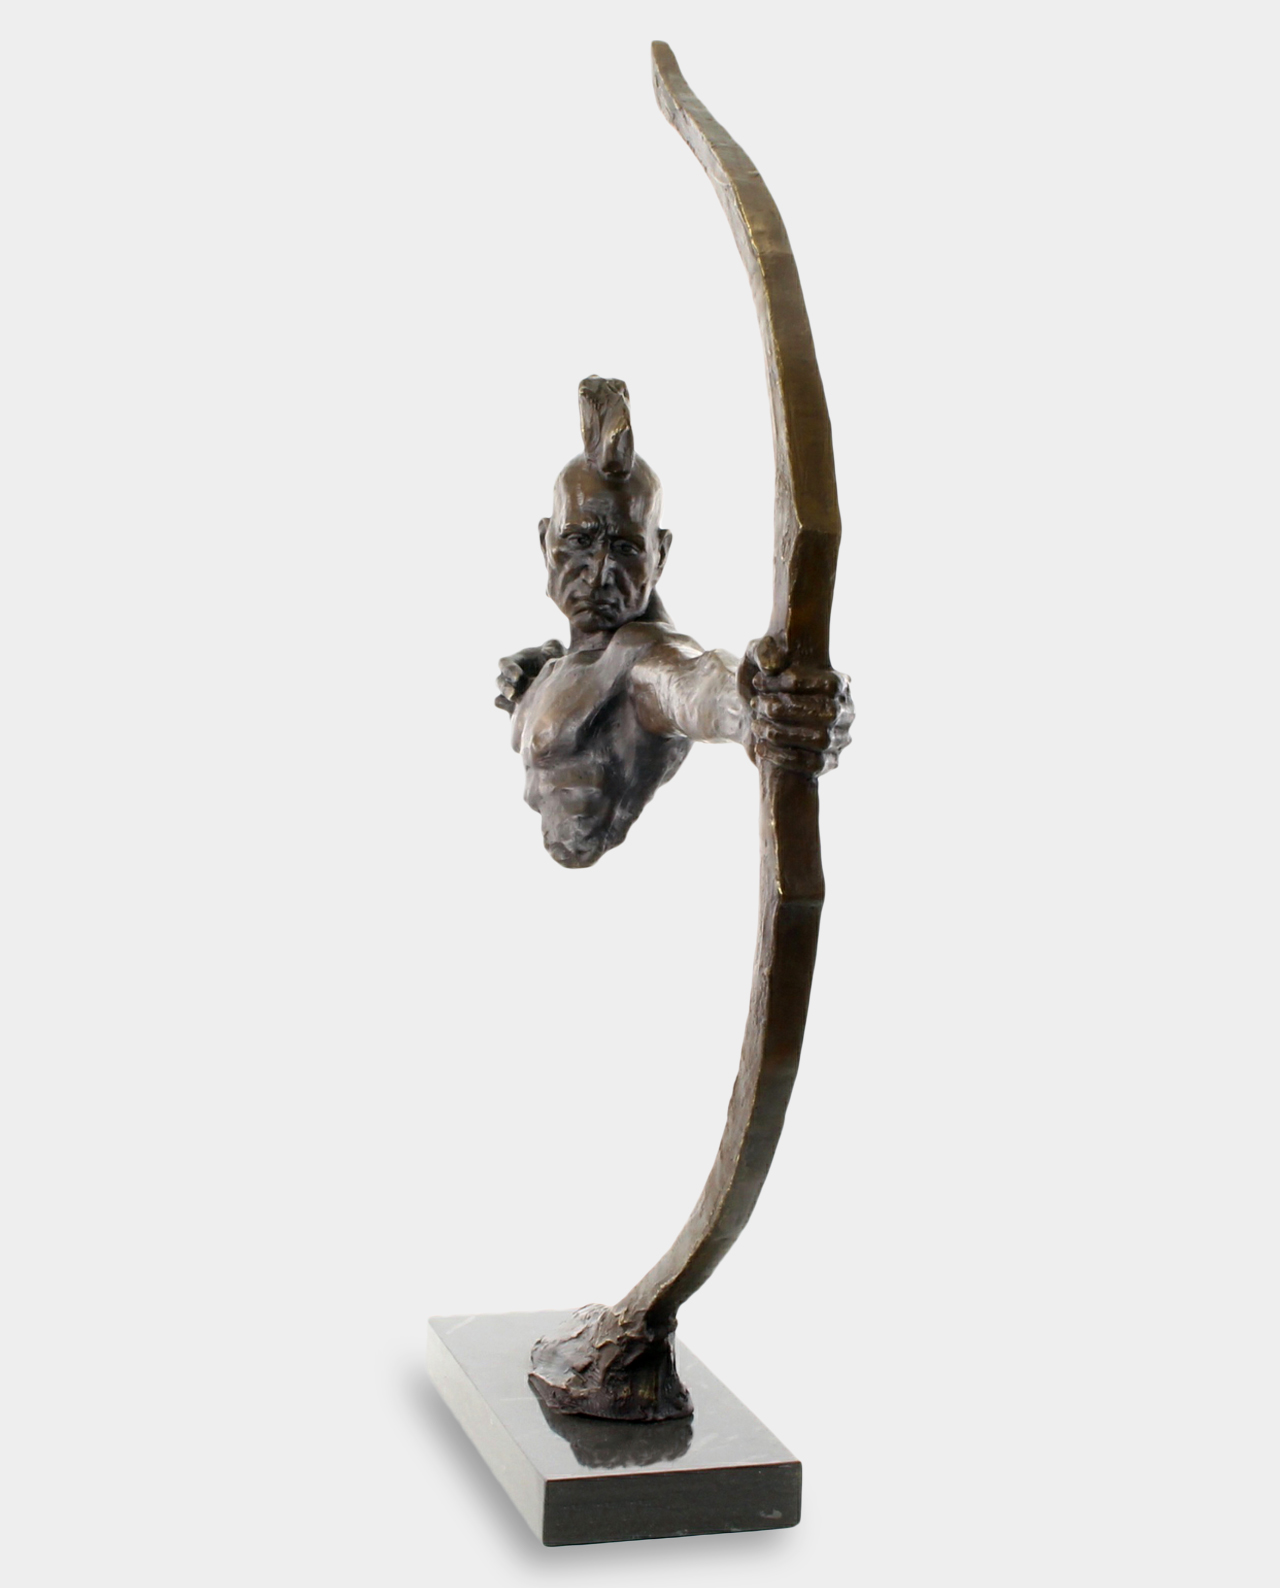 Design Toscano Kneeling Indian with Drawn Bow Statue Bronze